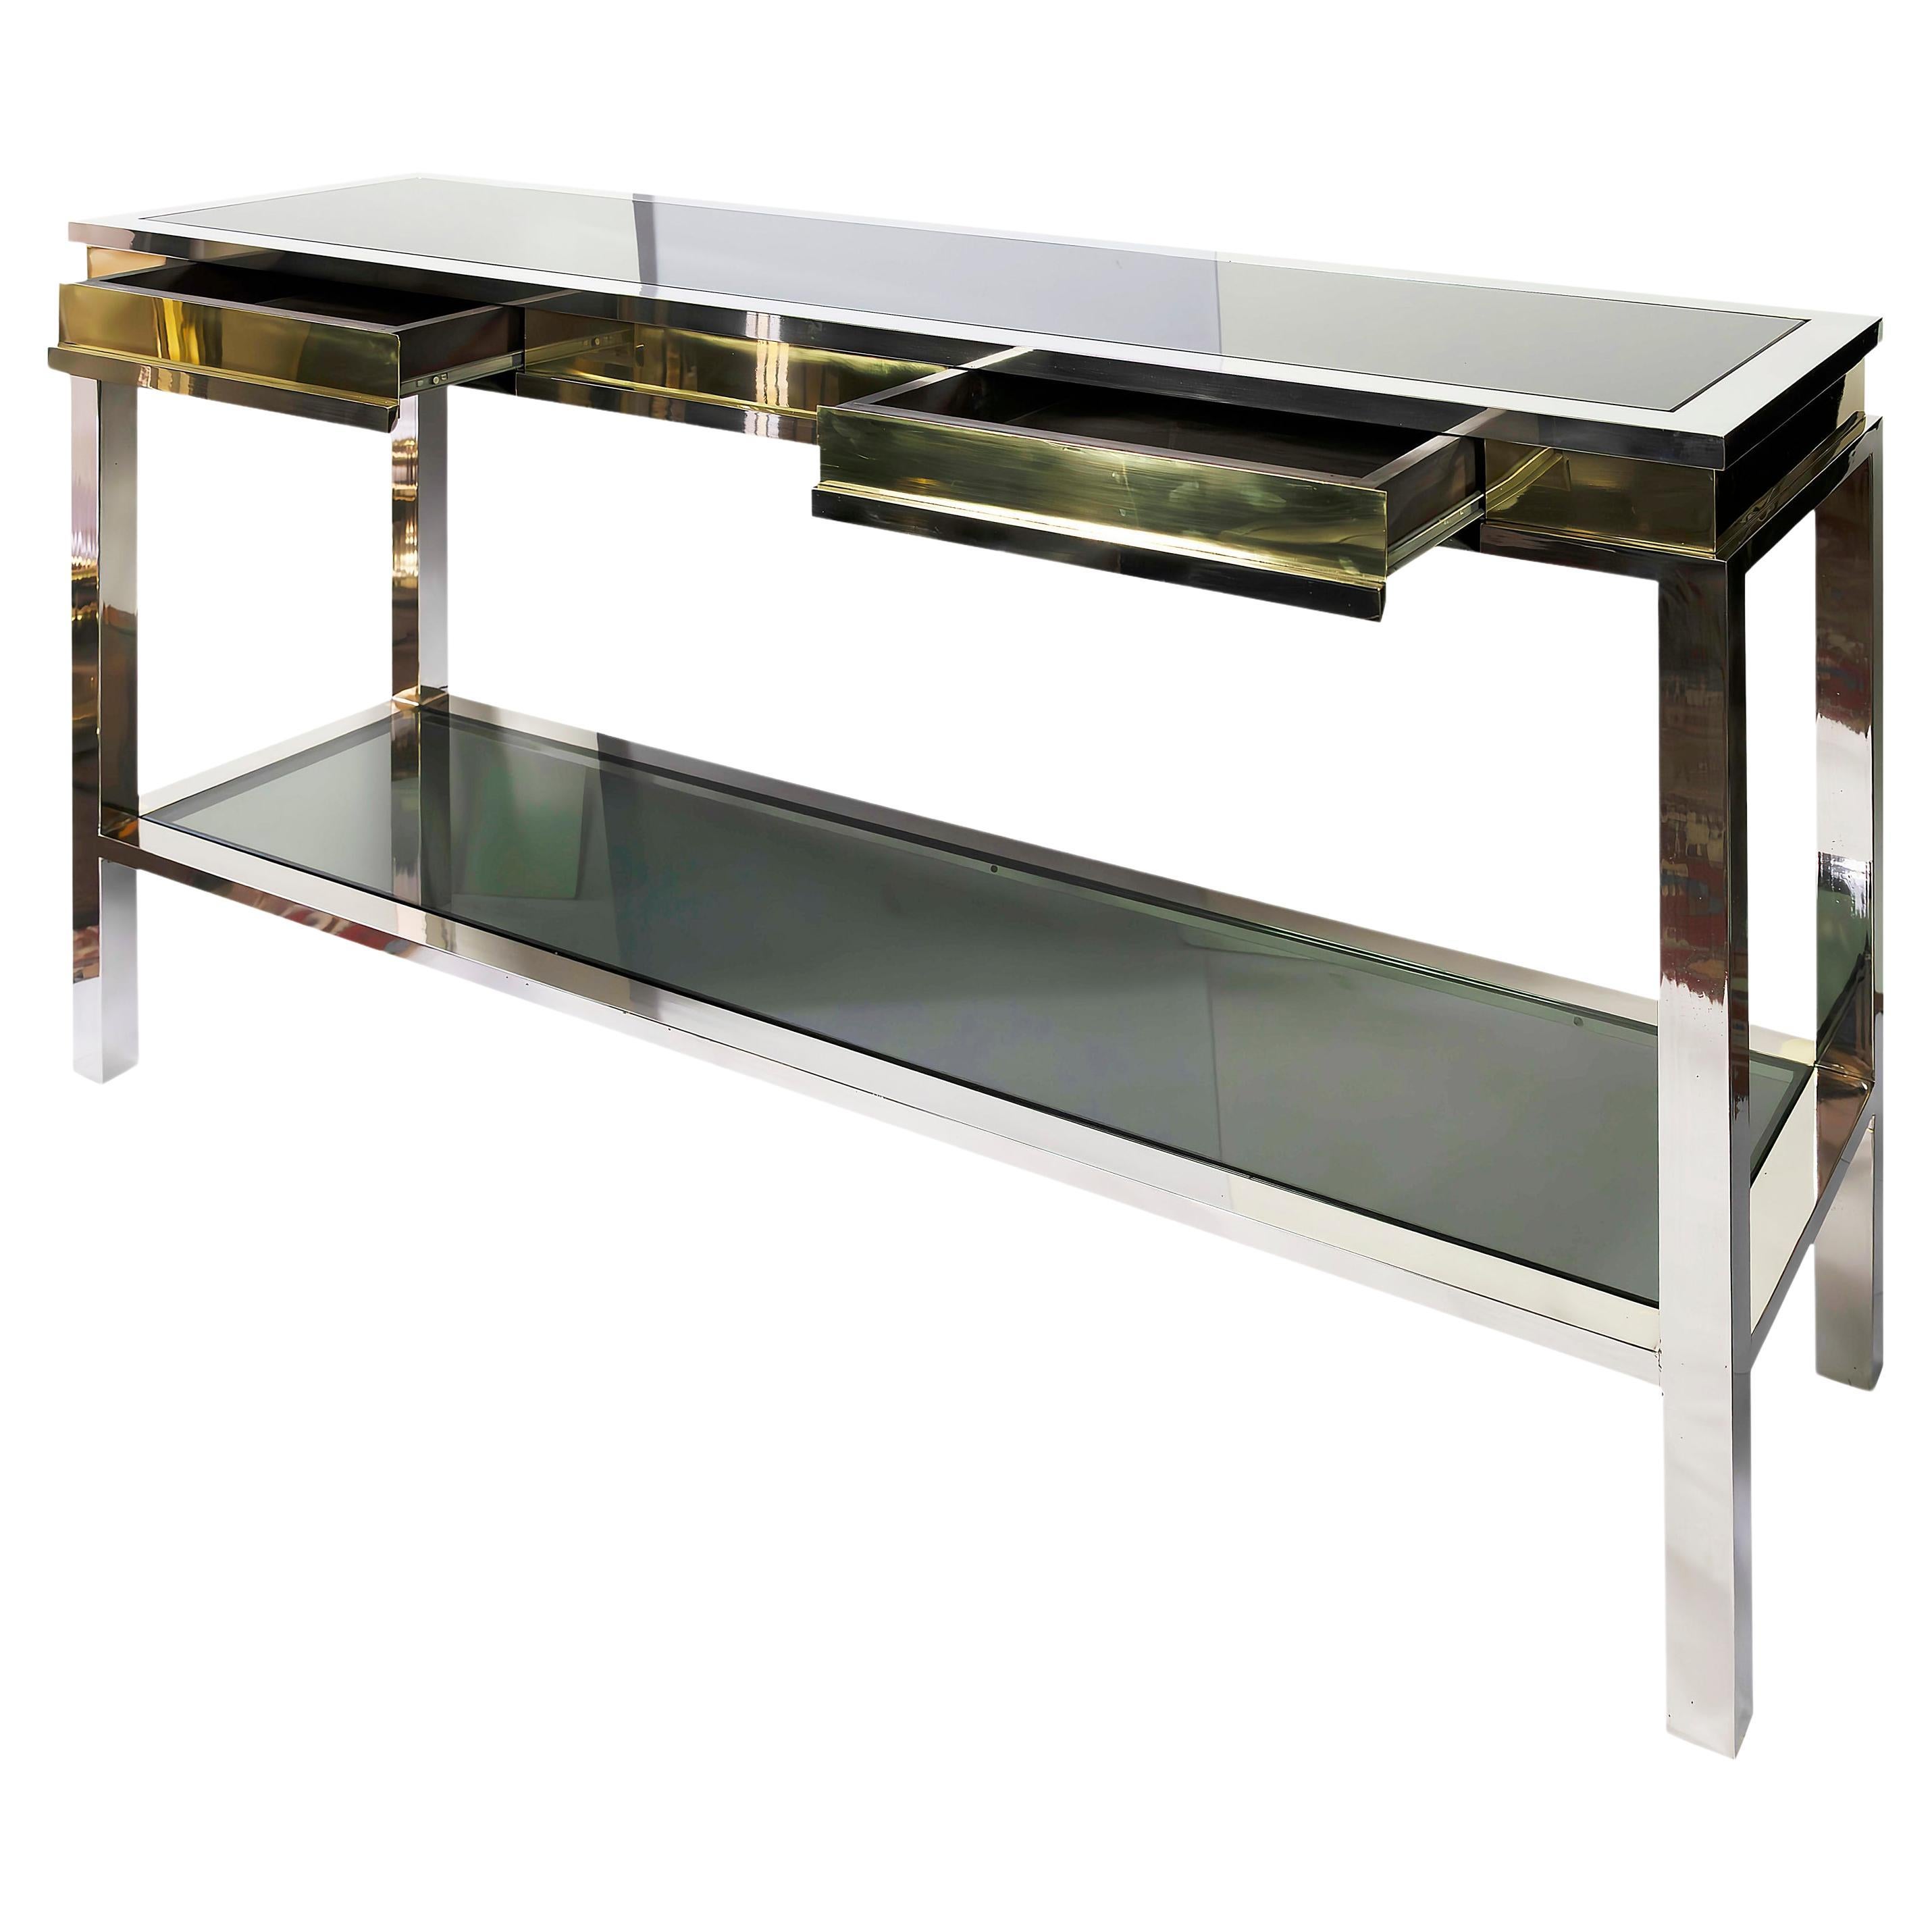 Mid-Century Italian Console Table with Drawers in Brass, Chrome, Glass, 1970's